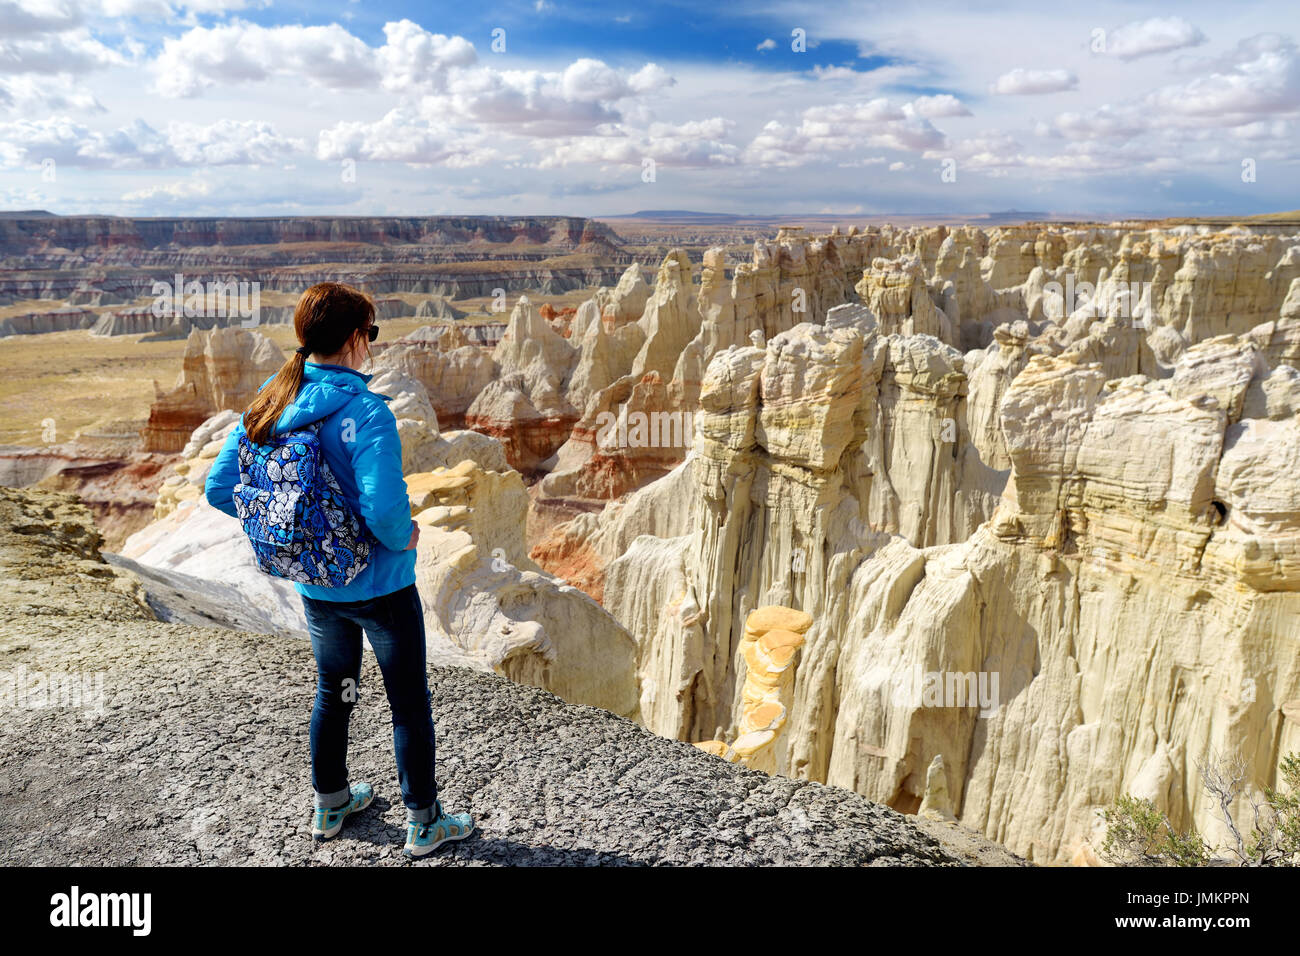 Hiker admiring views of stunning colorful sandstone formations of Coal Mine Canyon, Arizona, USA Stock Photo